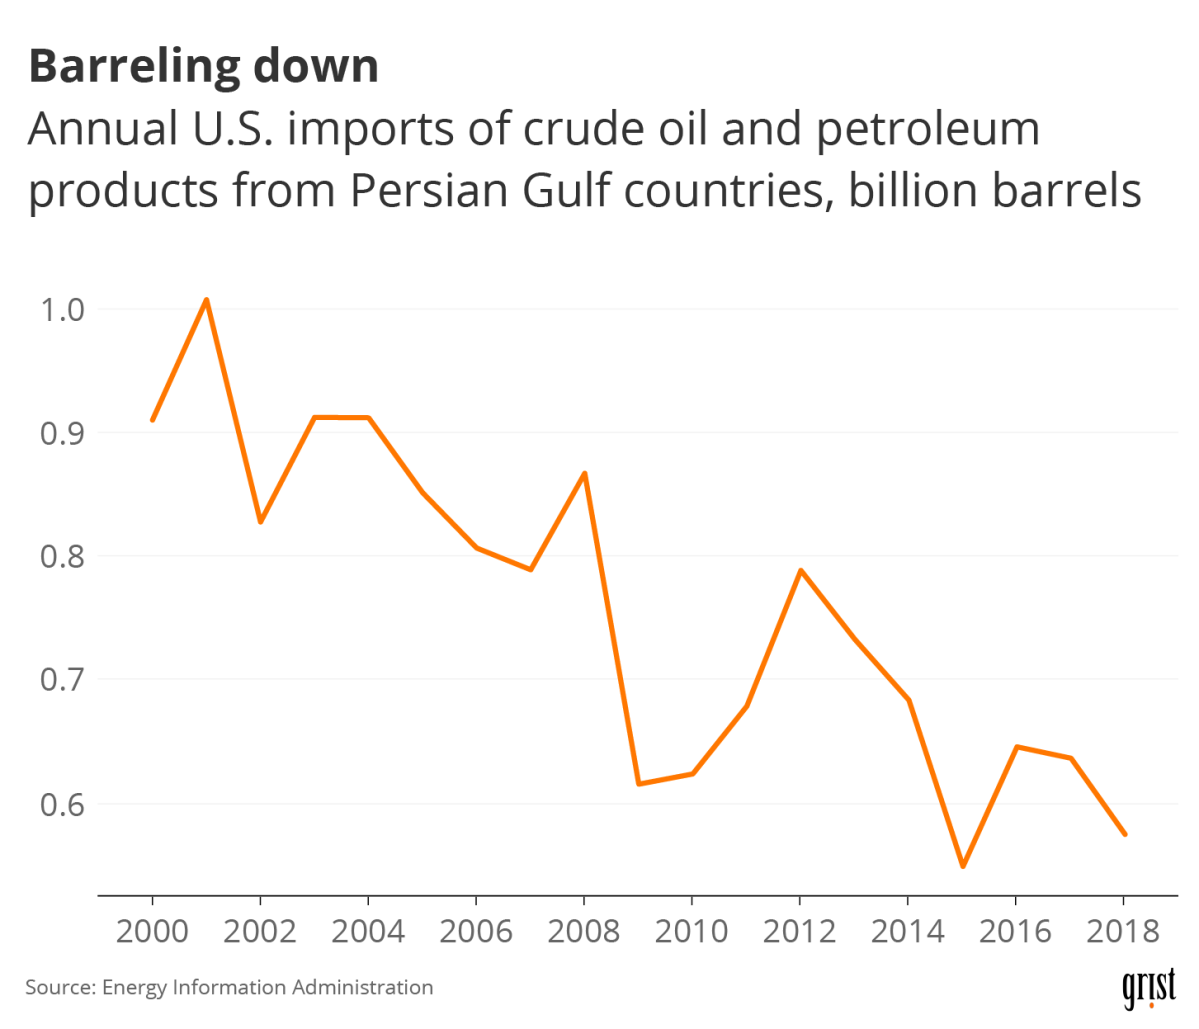 A line chart showing decreasing U.S. imports of oil from Persian Gulf countries between 2000 and 2018.